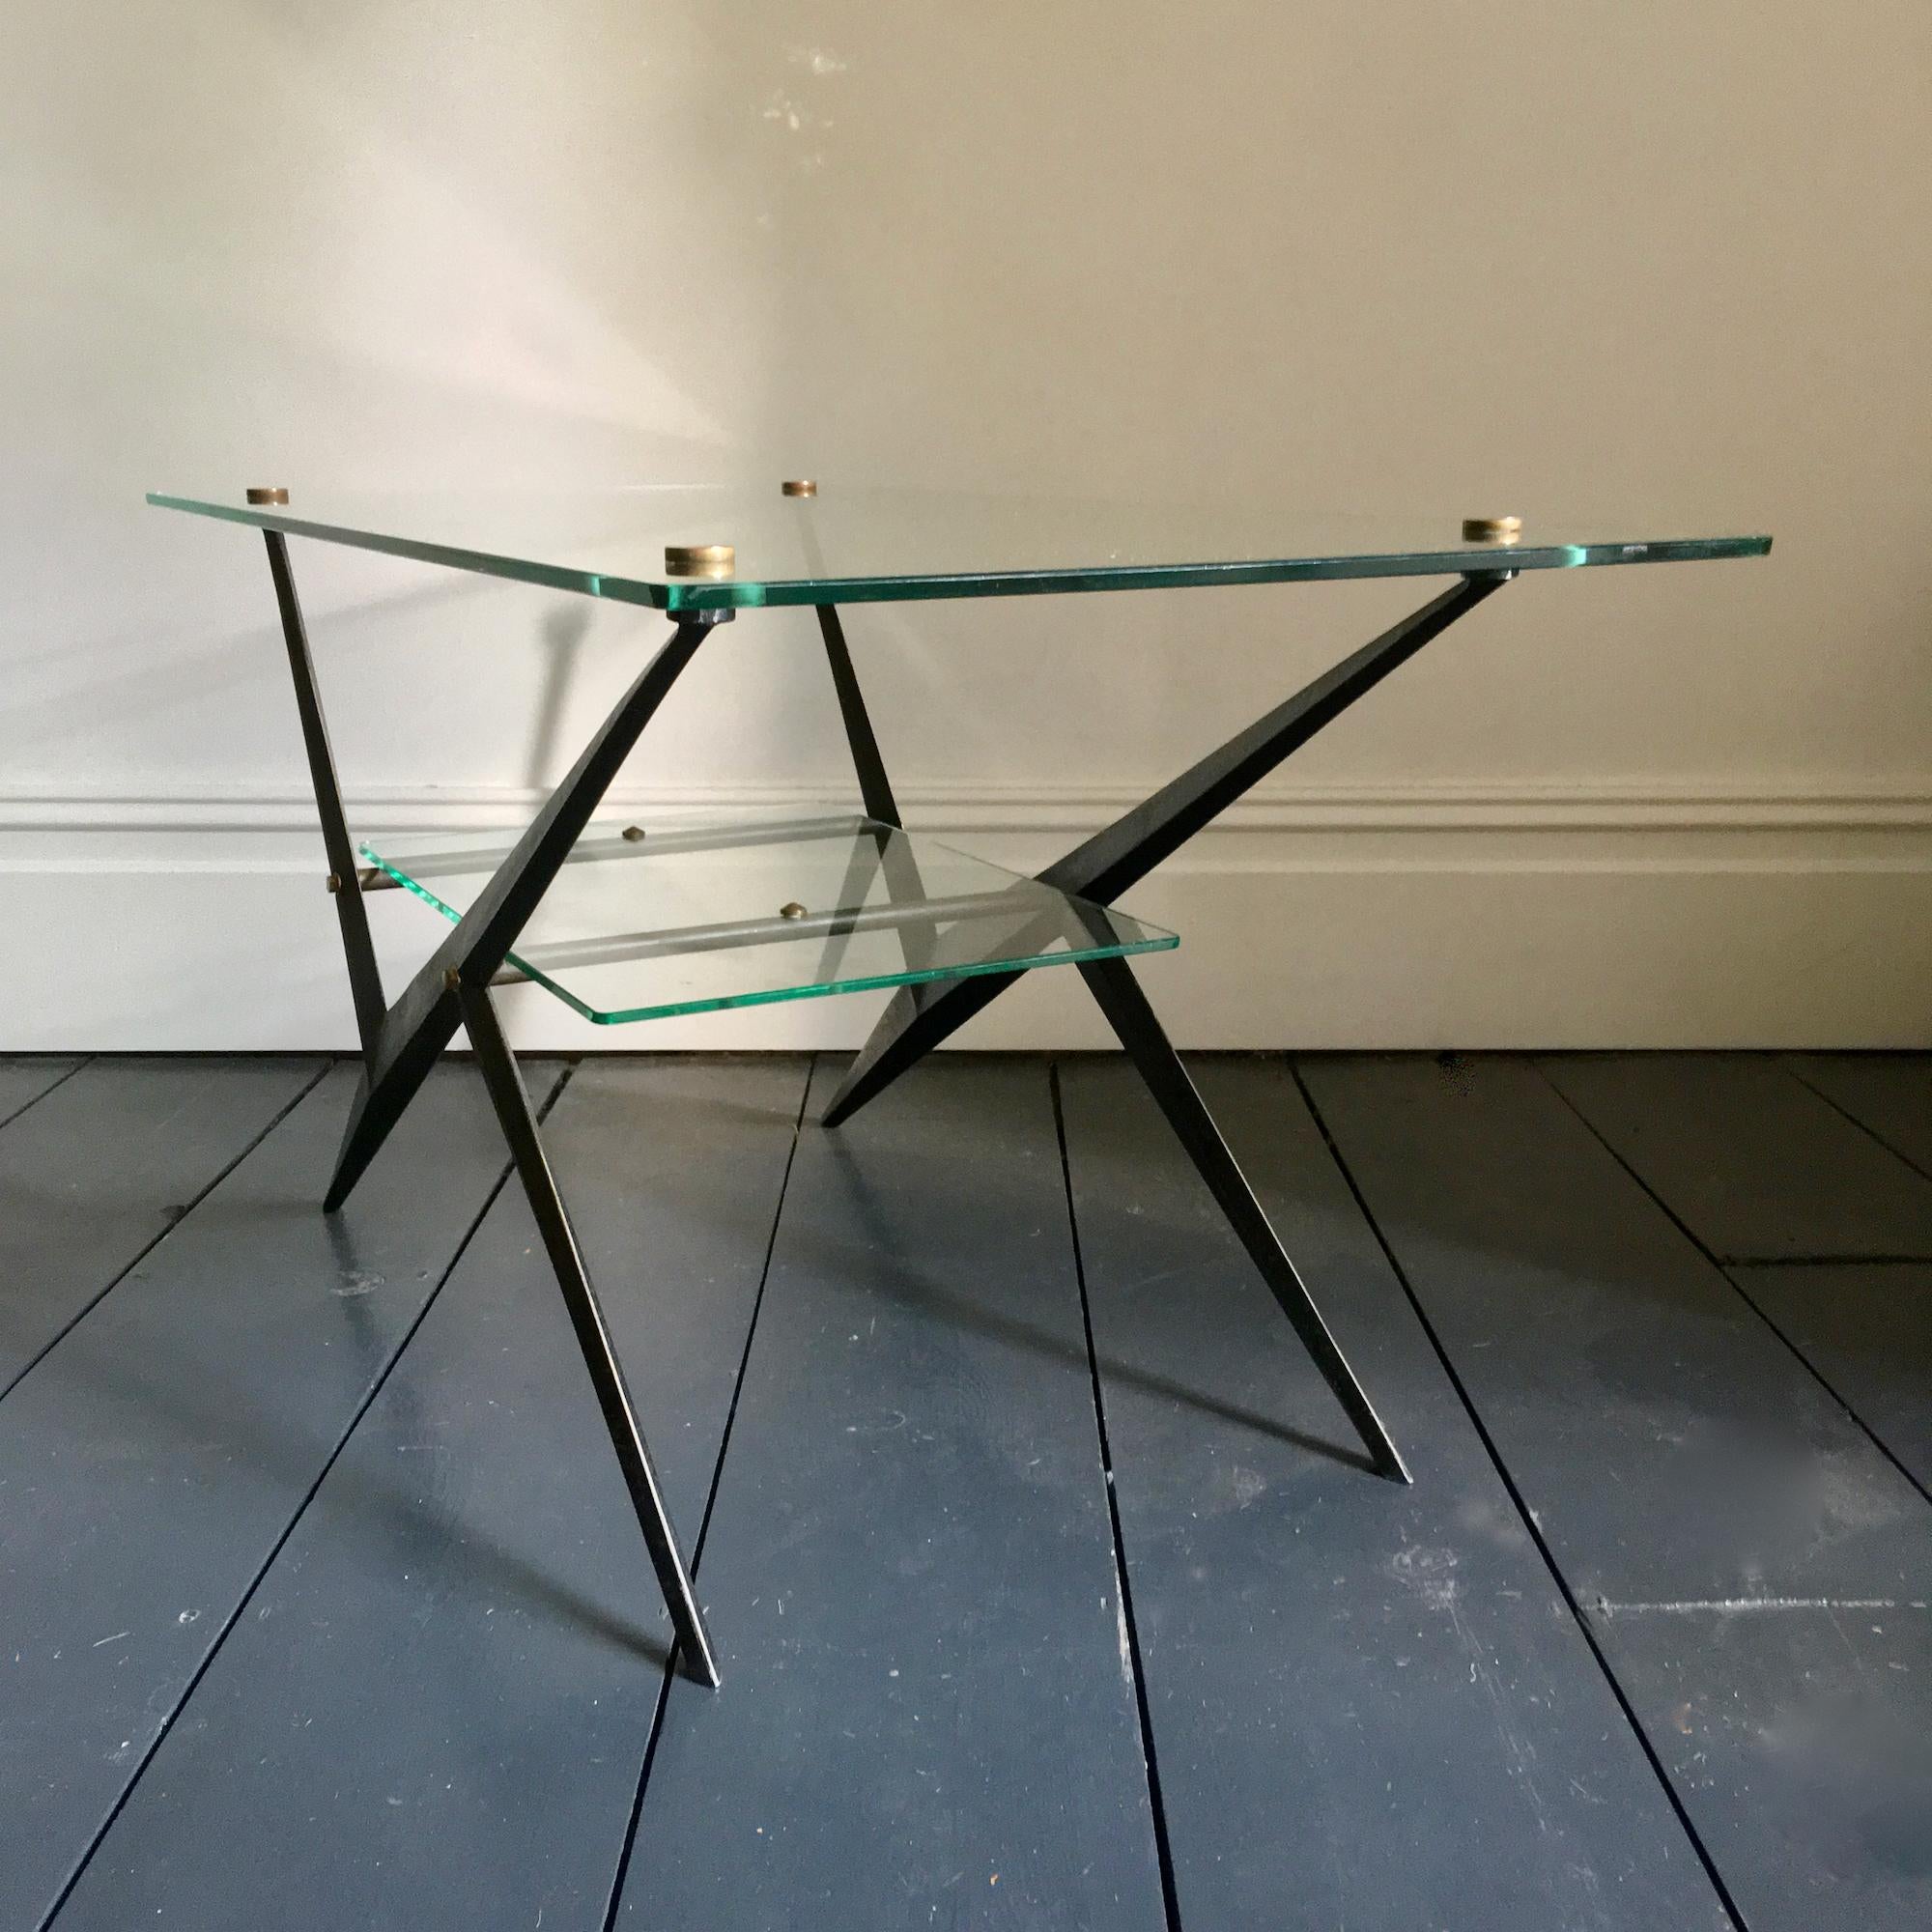 Elegant coffee table or side table designed by Angelo Ostuni; black lacquered metal frame with brushed finish, brass fixings and two glass tiers.

The piece is in very nice original condition. In line with age, there are signs of wear to both the